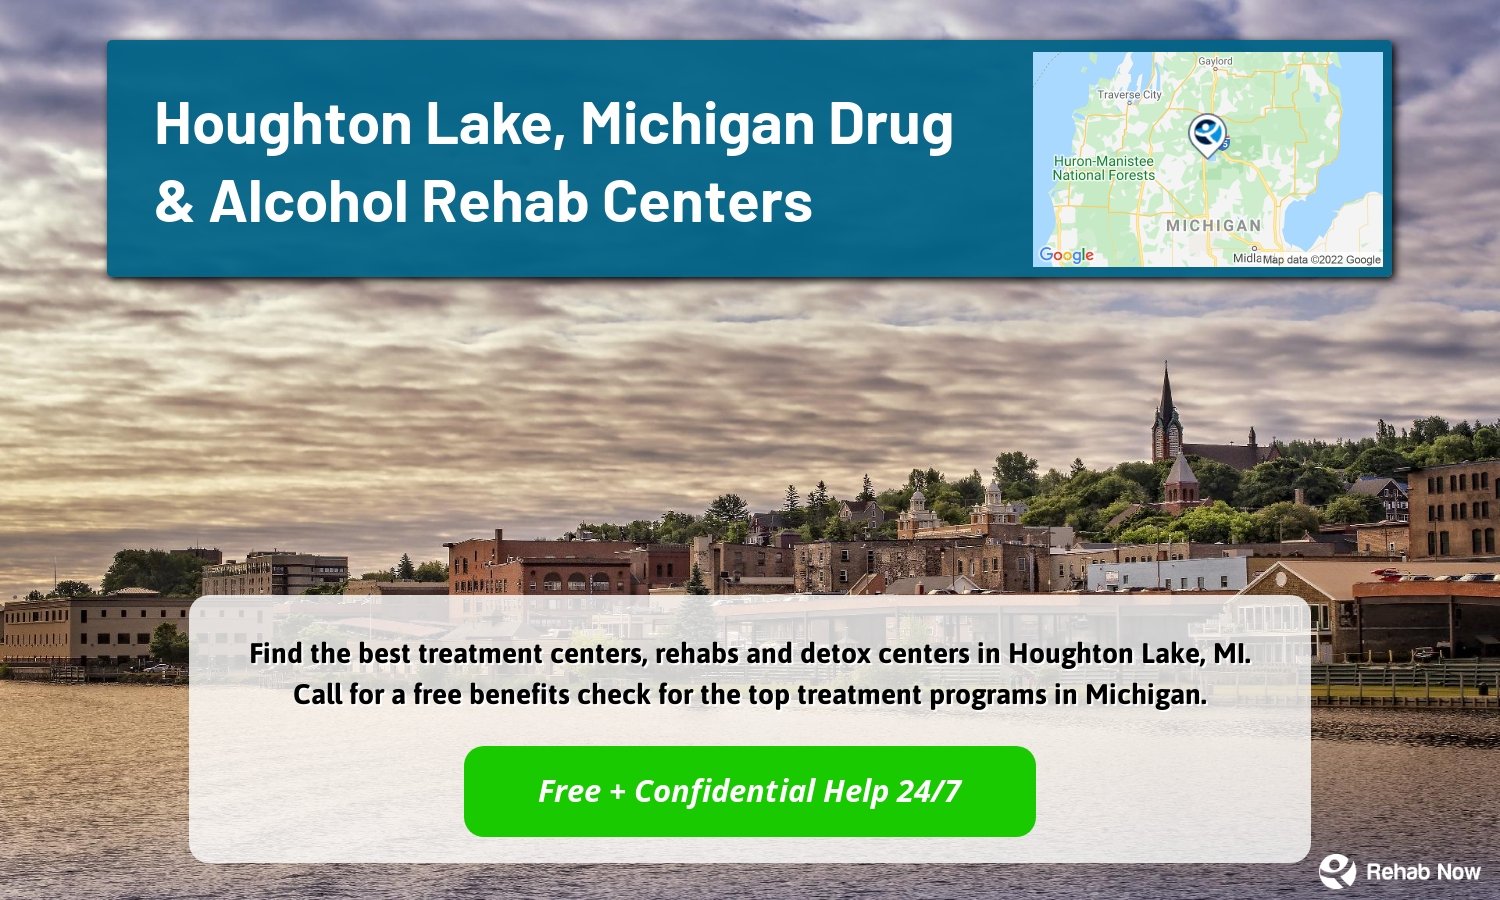 Find the best treatment centers, rehabs and detox centers in Houghton Lake, MI. Call for a free benefits check for the top treatment programs in Michigan.